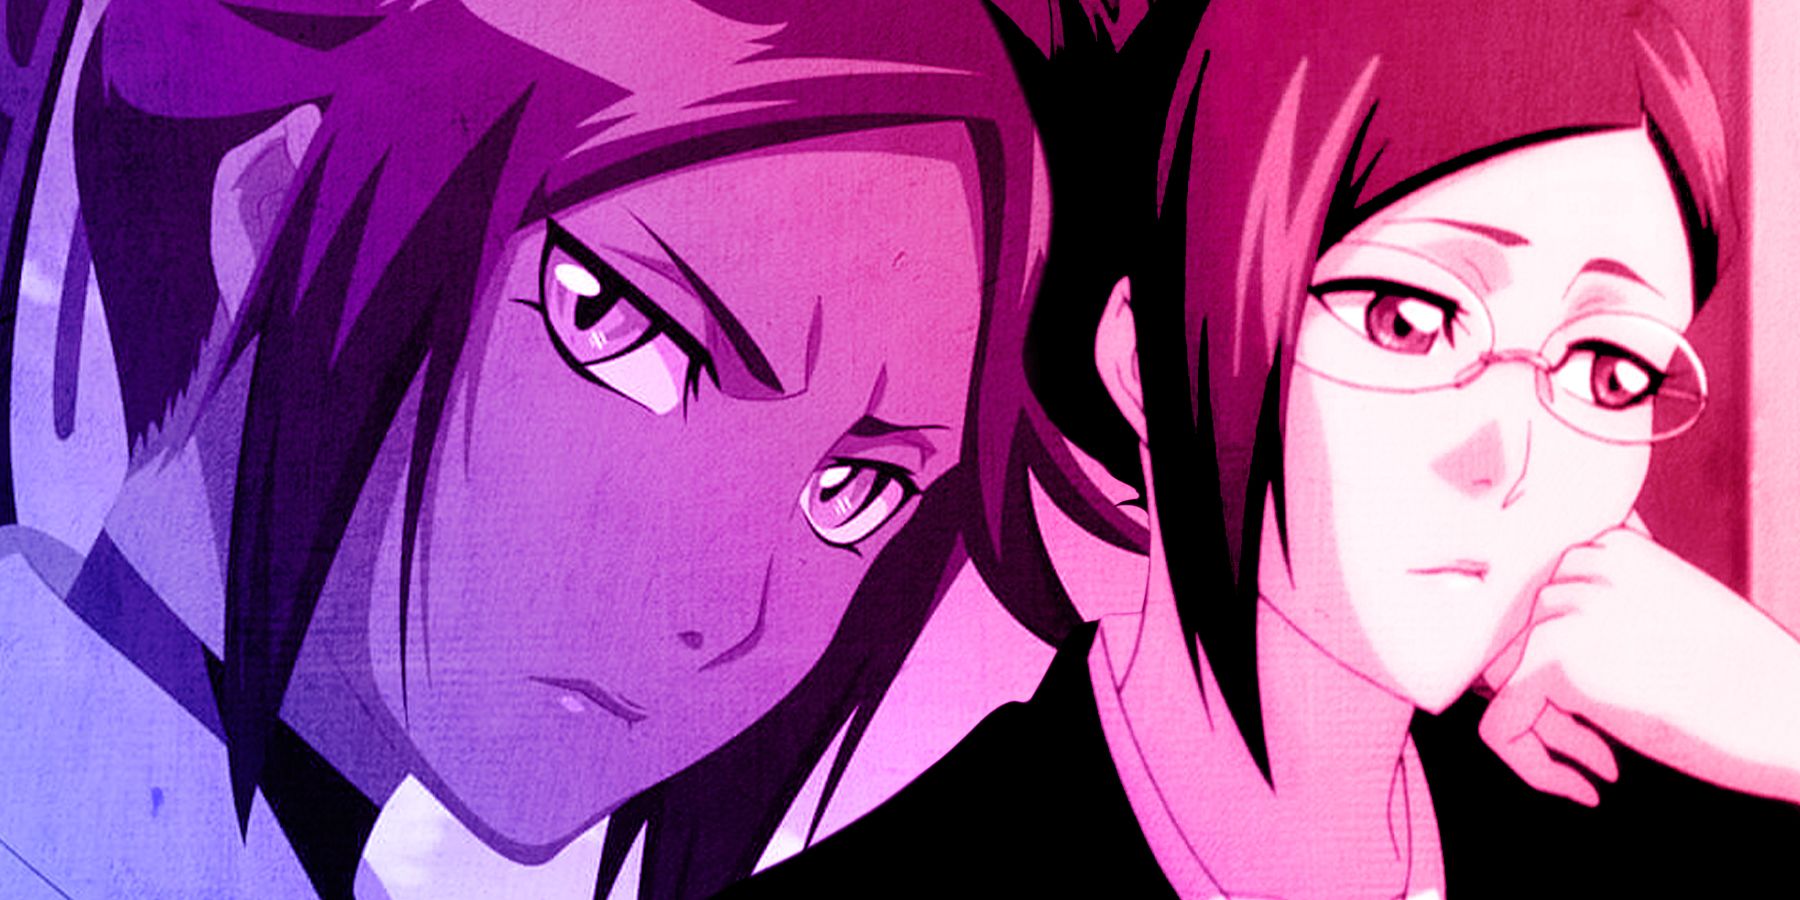 Split image of Bleach's Yoruichi Shihouin on the left and Nanao Ise on the right